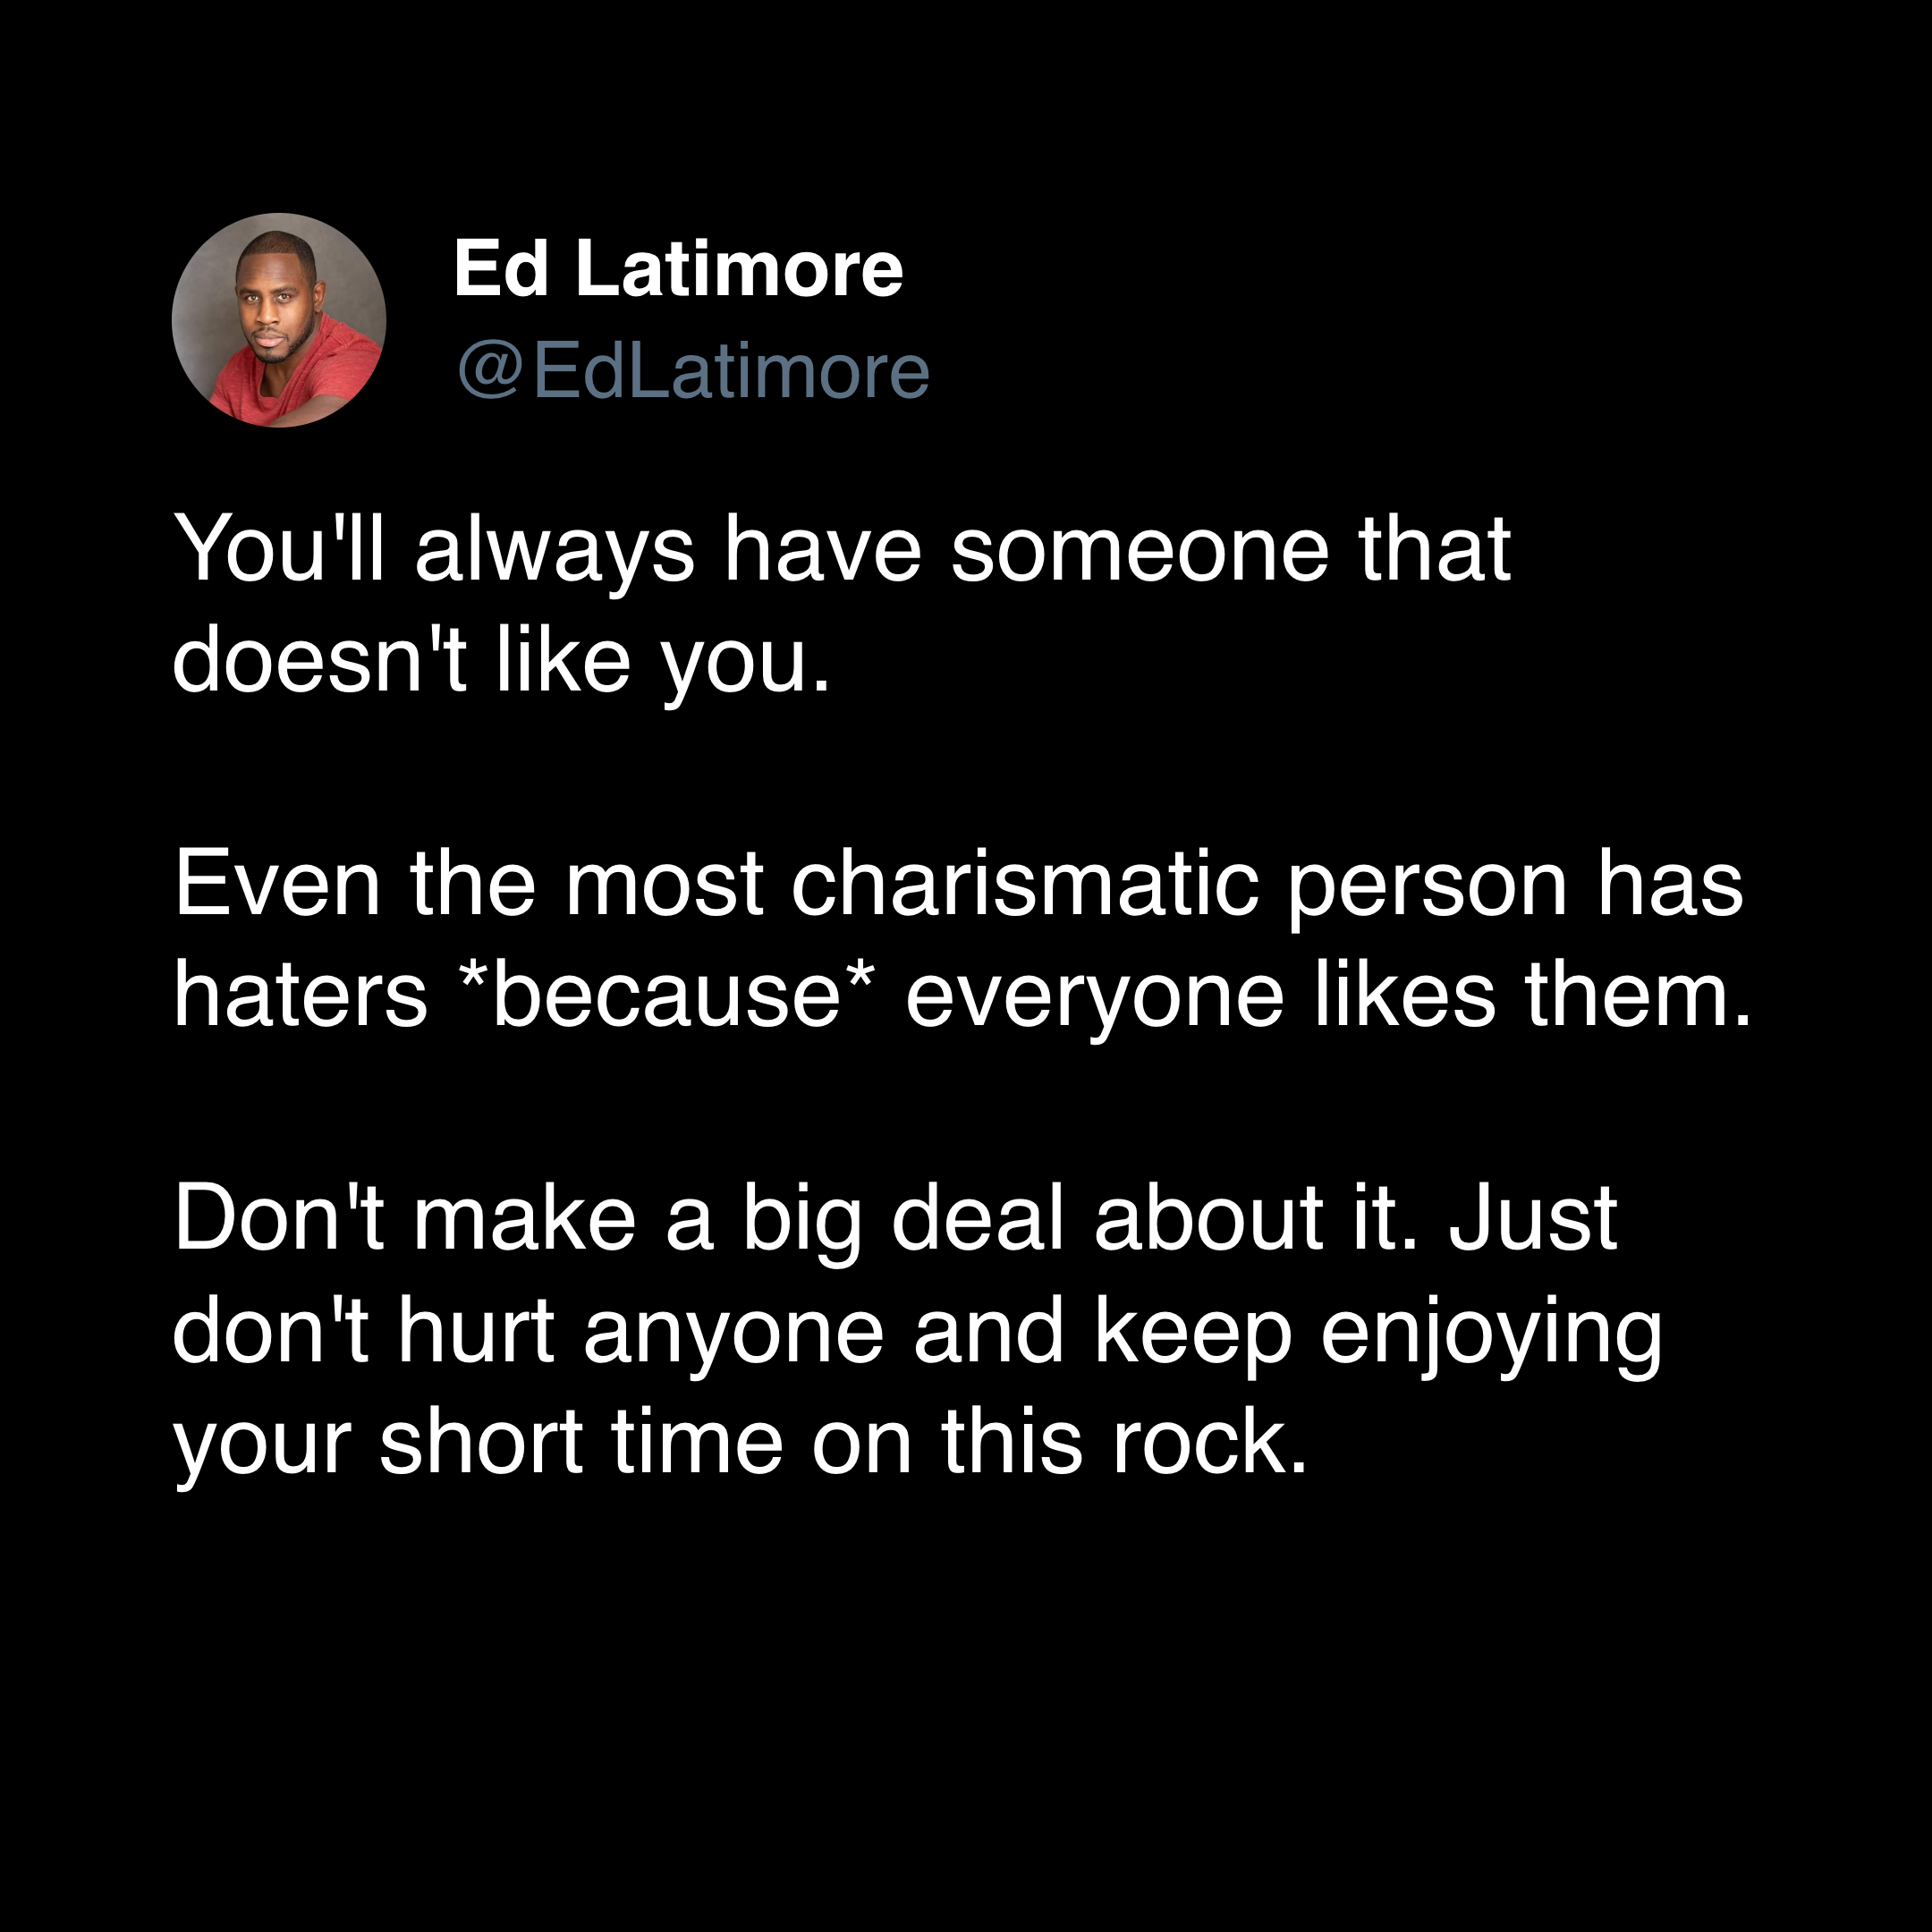 ed latimore hater quote "not everyone will like you"